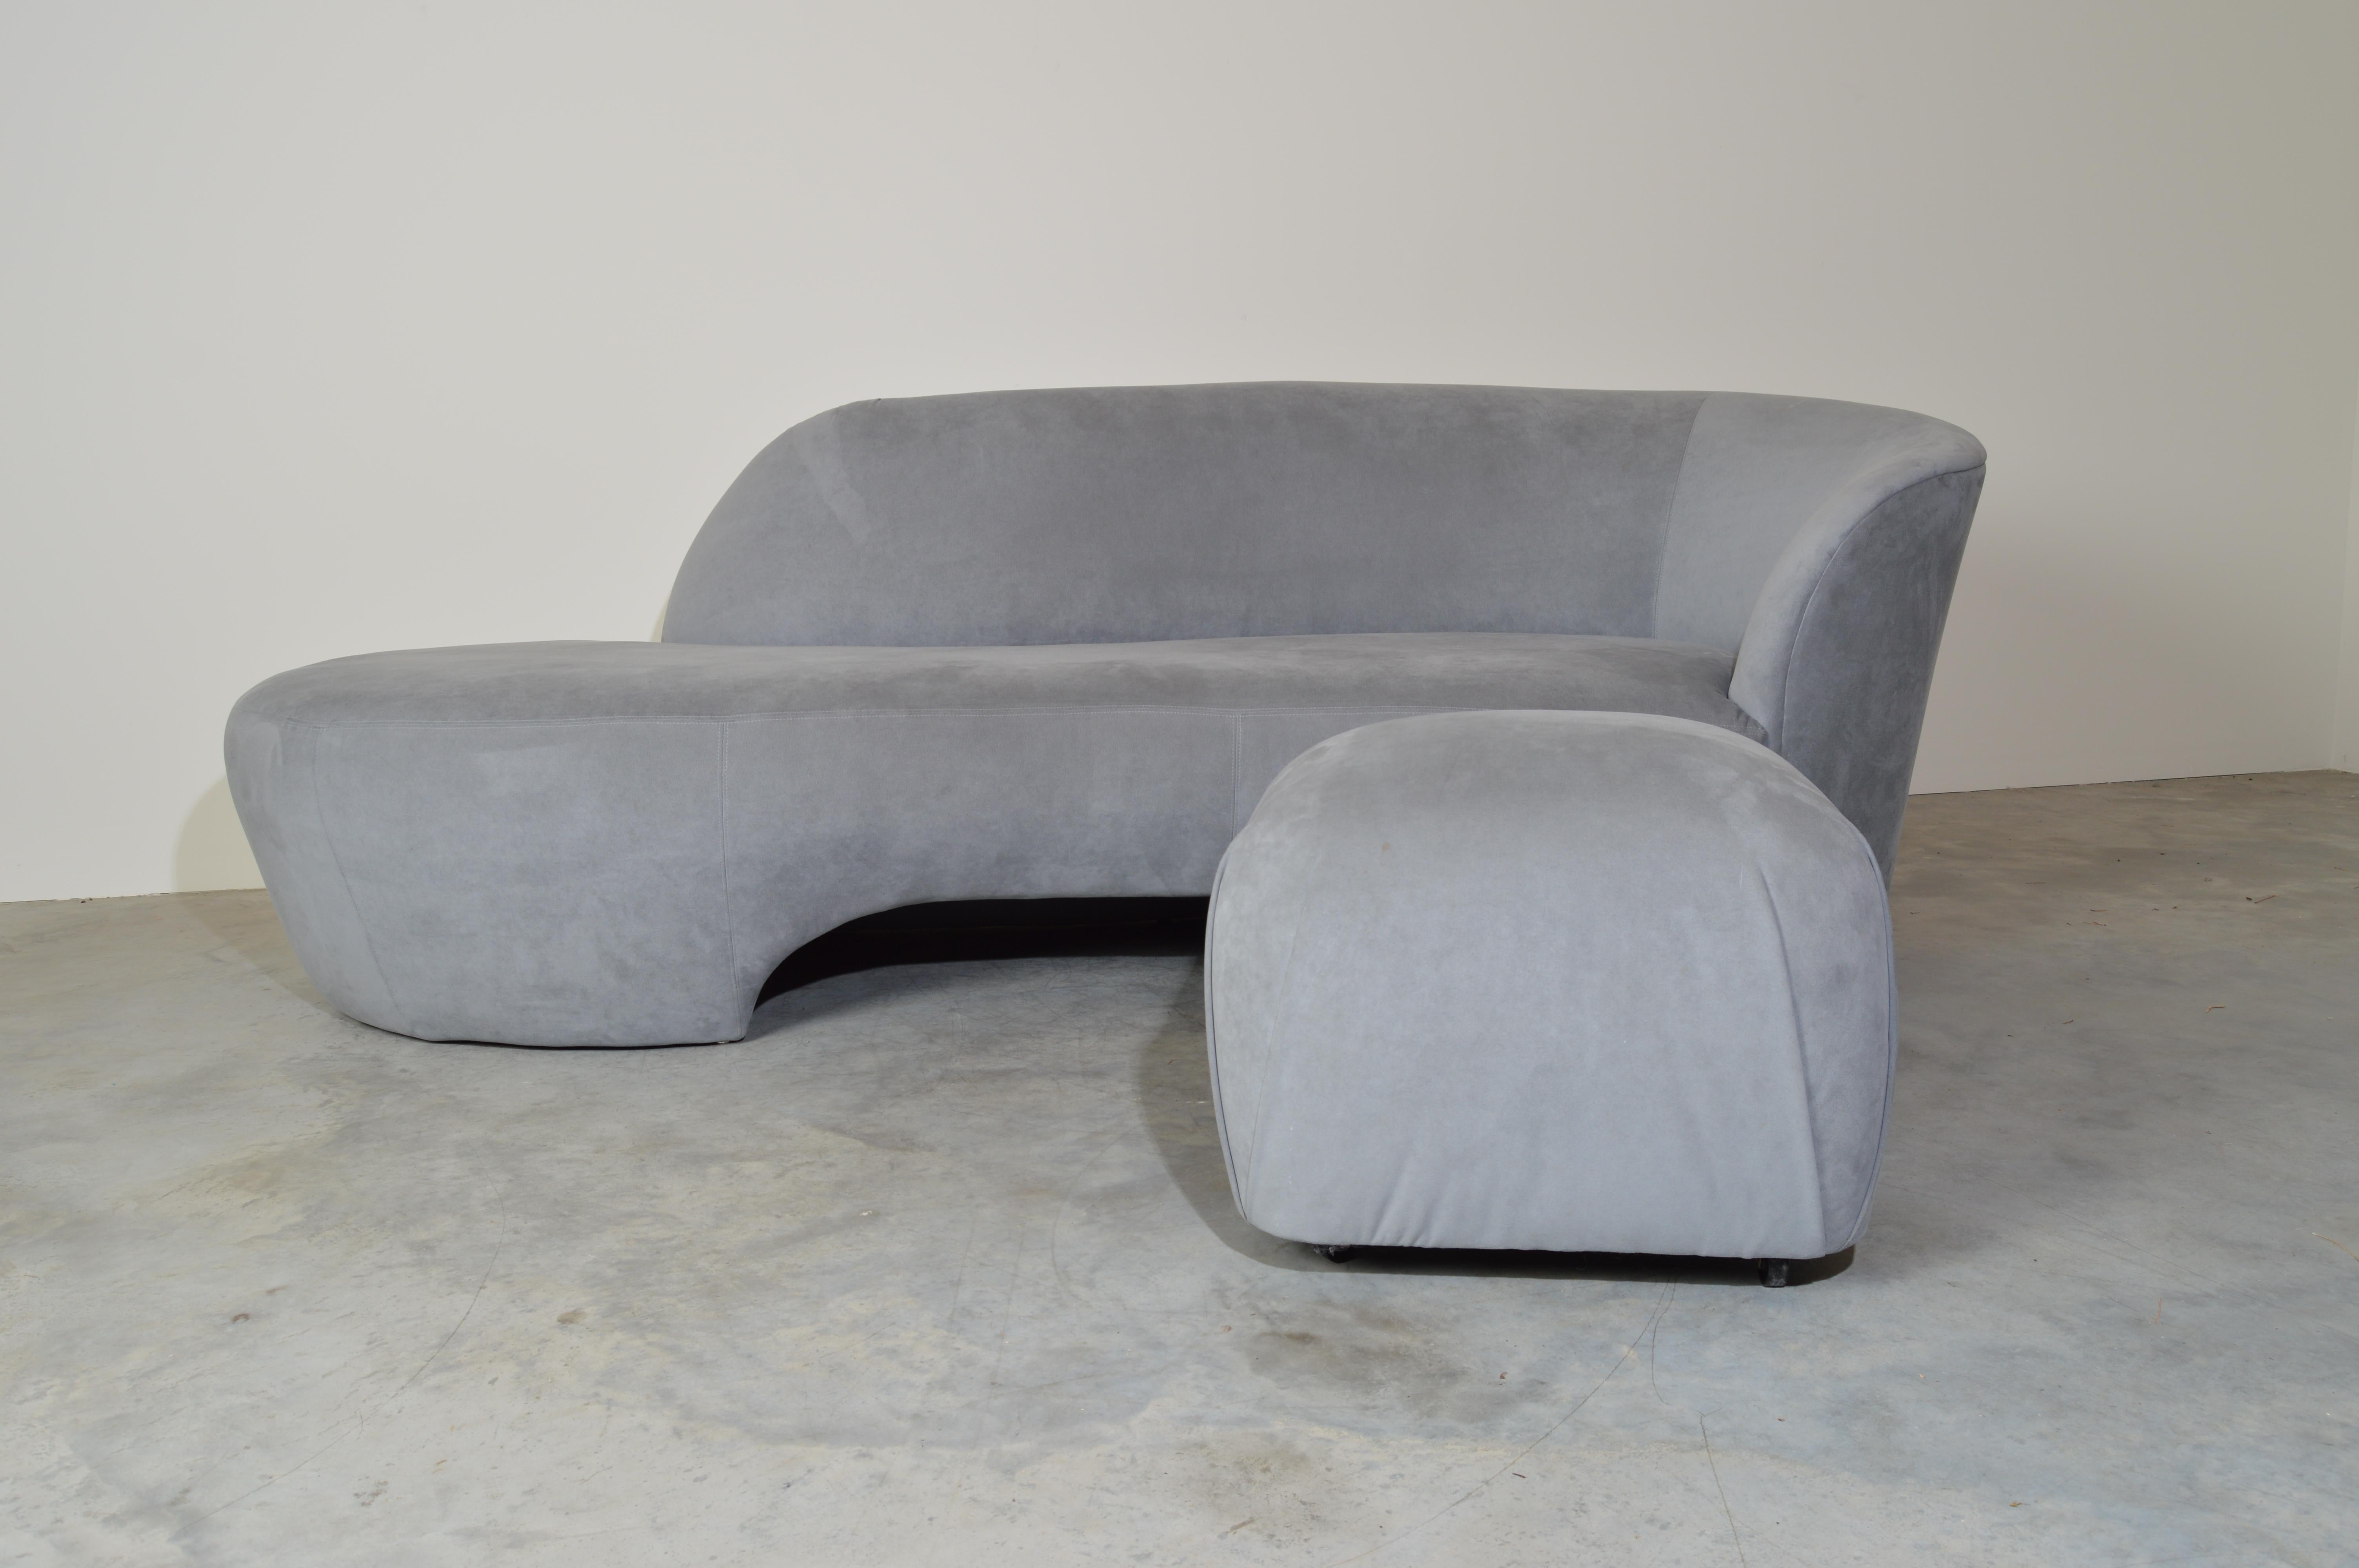 Weiman Preview Sofa Chaise Lounge with Pouf Ottoman in Ultrasuede after Kagan 11